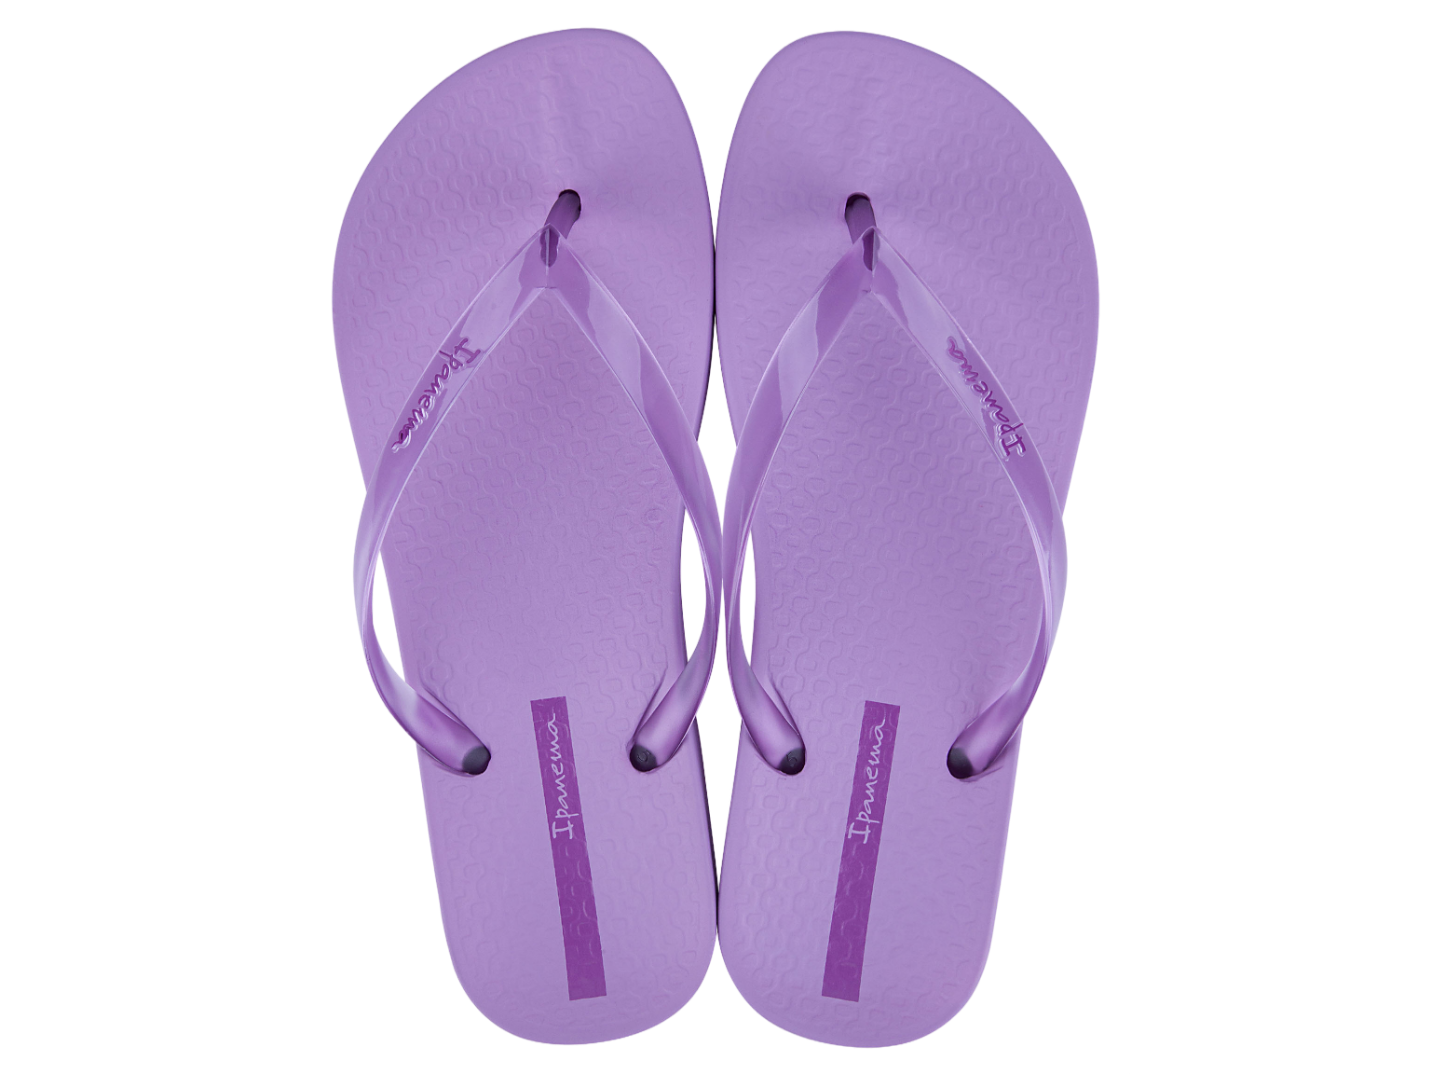 Ipanema Anatomic Connect Slippers Dames - Lilac - Maat 39